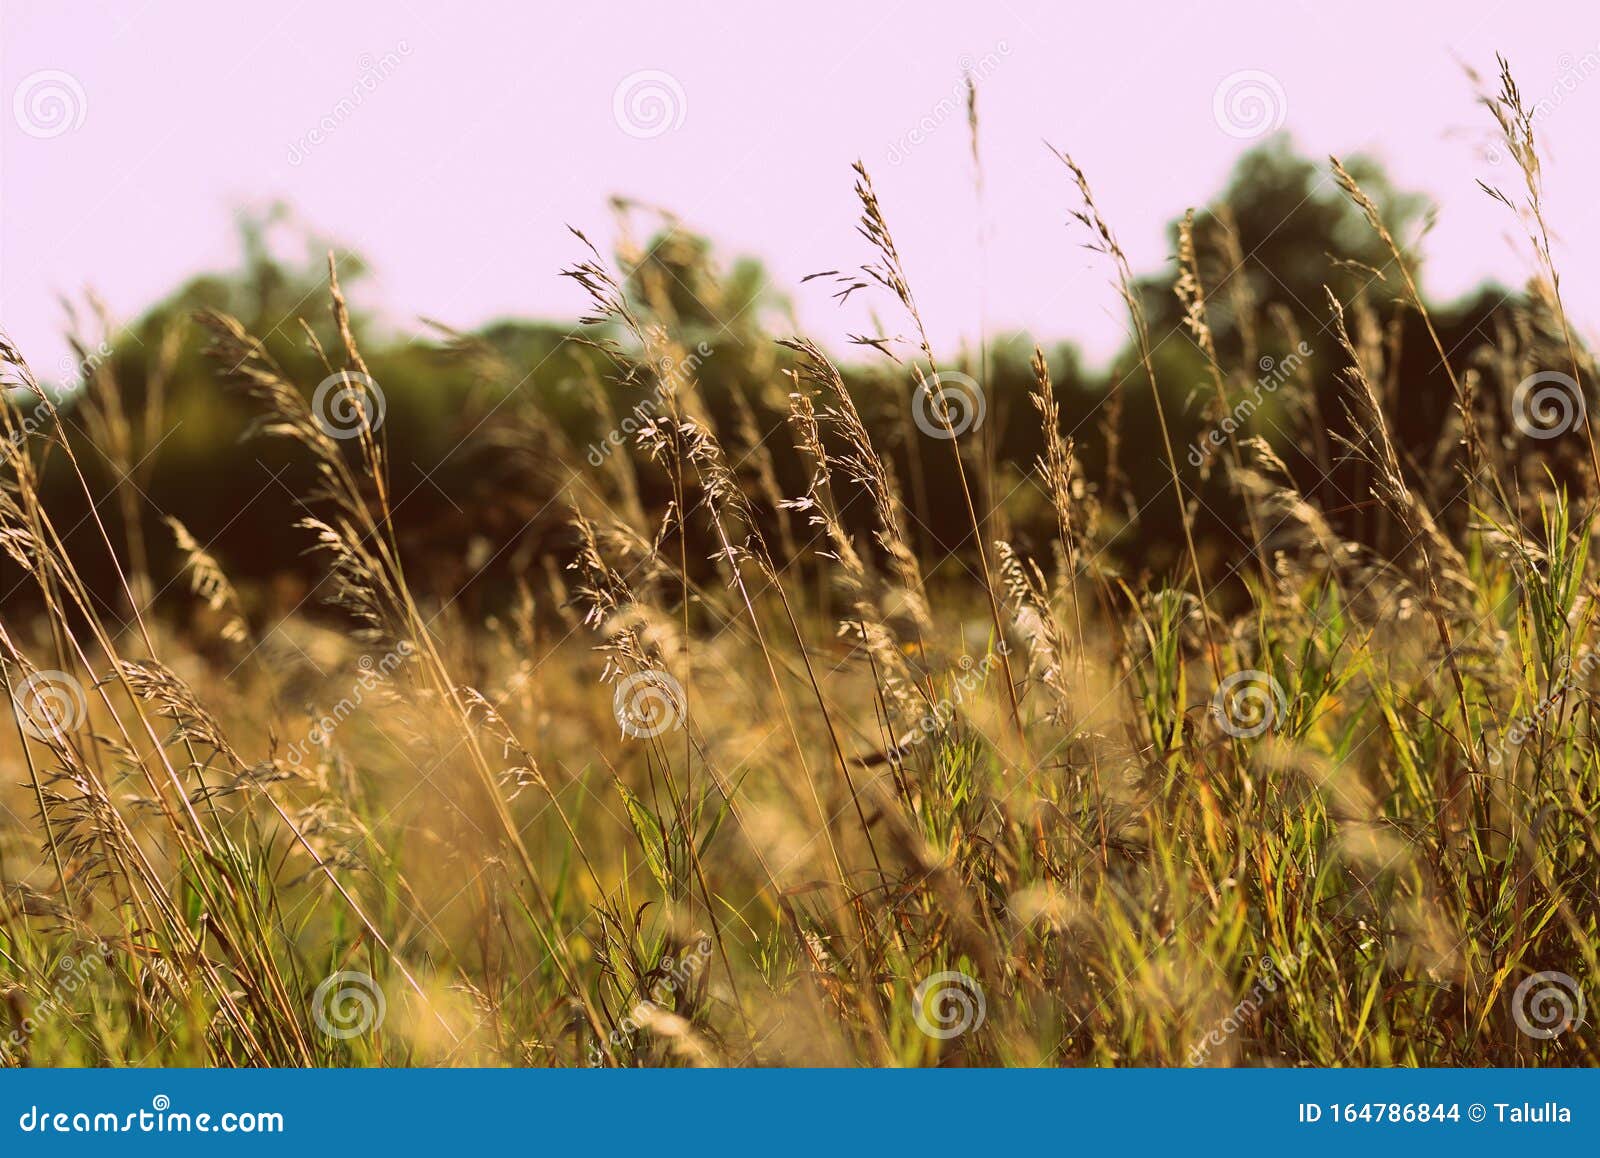 Dry Grass Closeup on a Sunlit Meadow on a Summer Day. Retro Style Toned